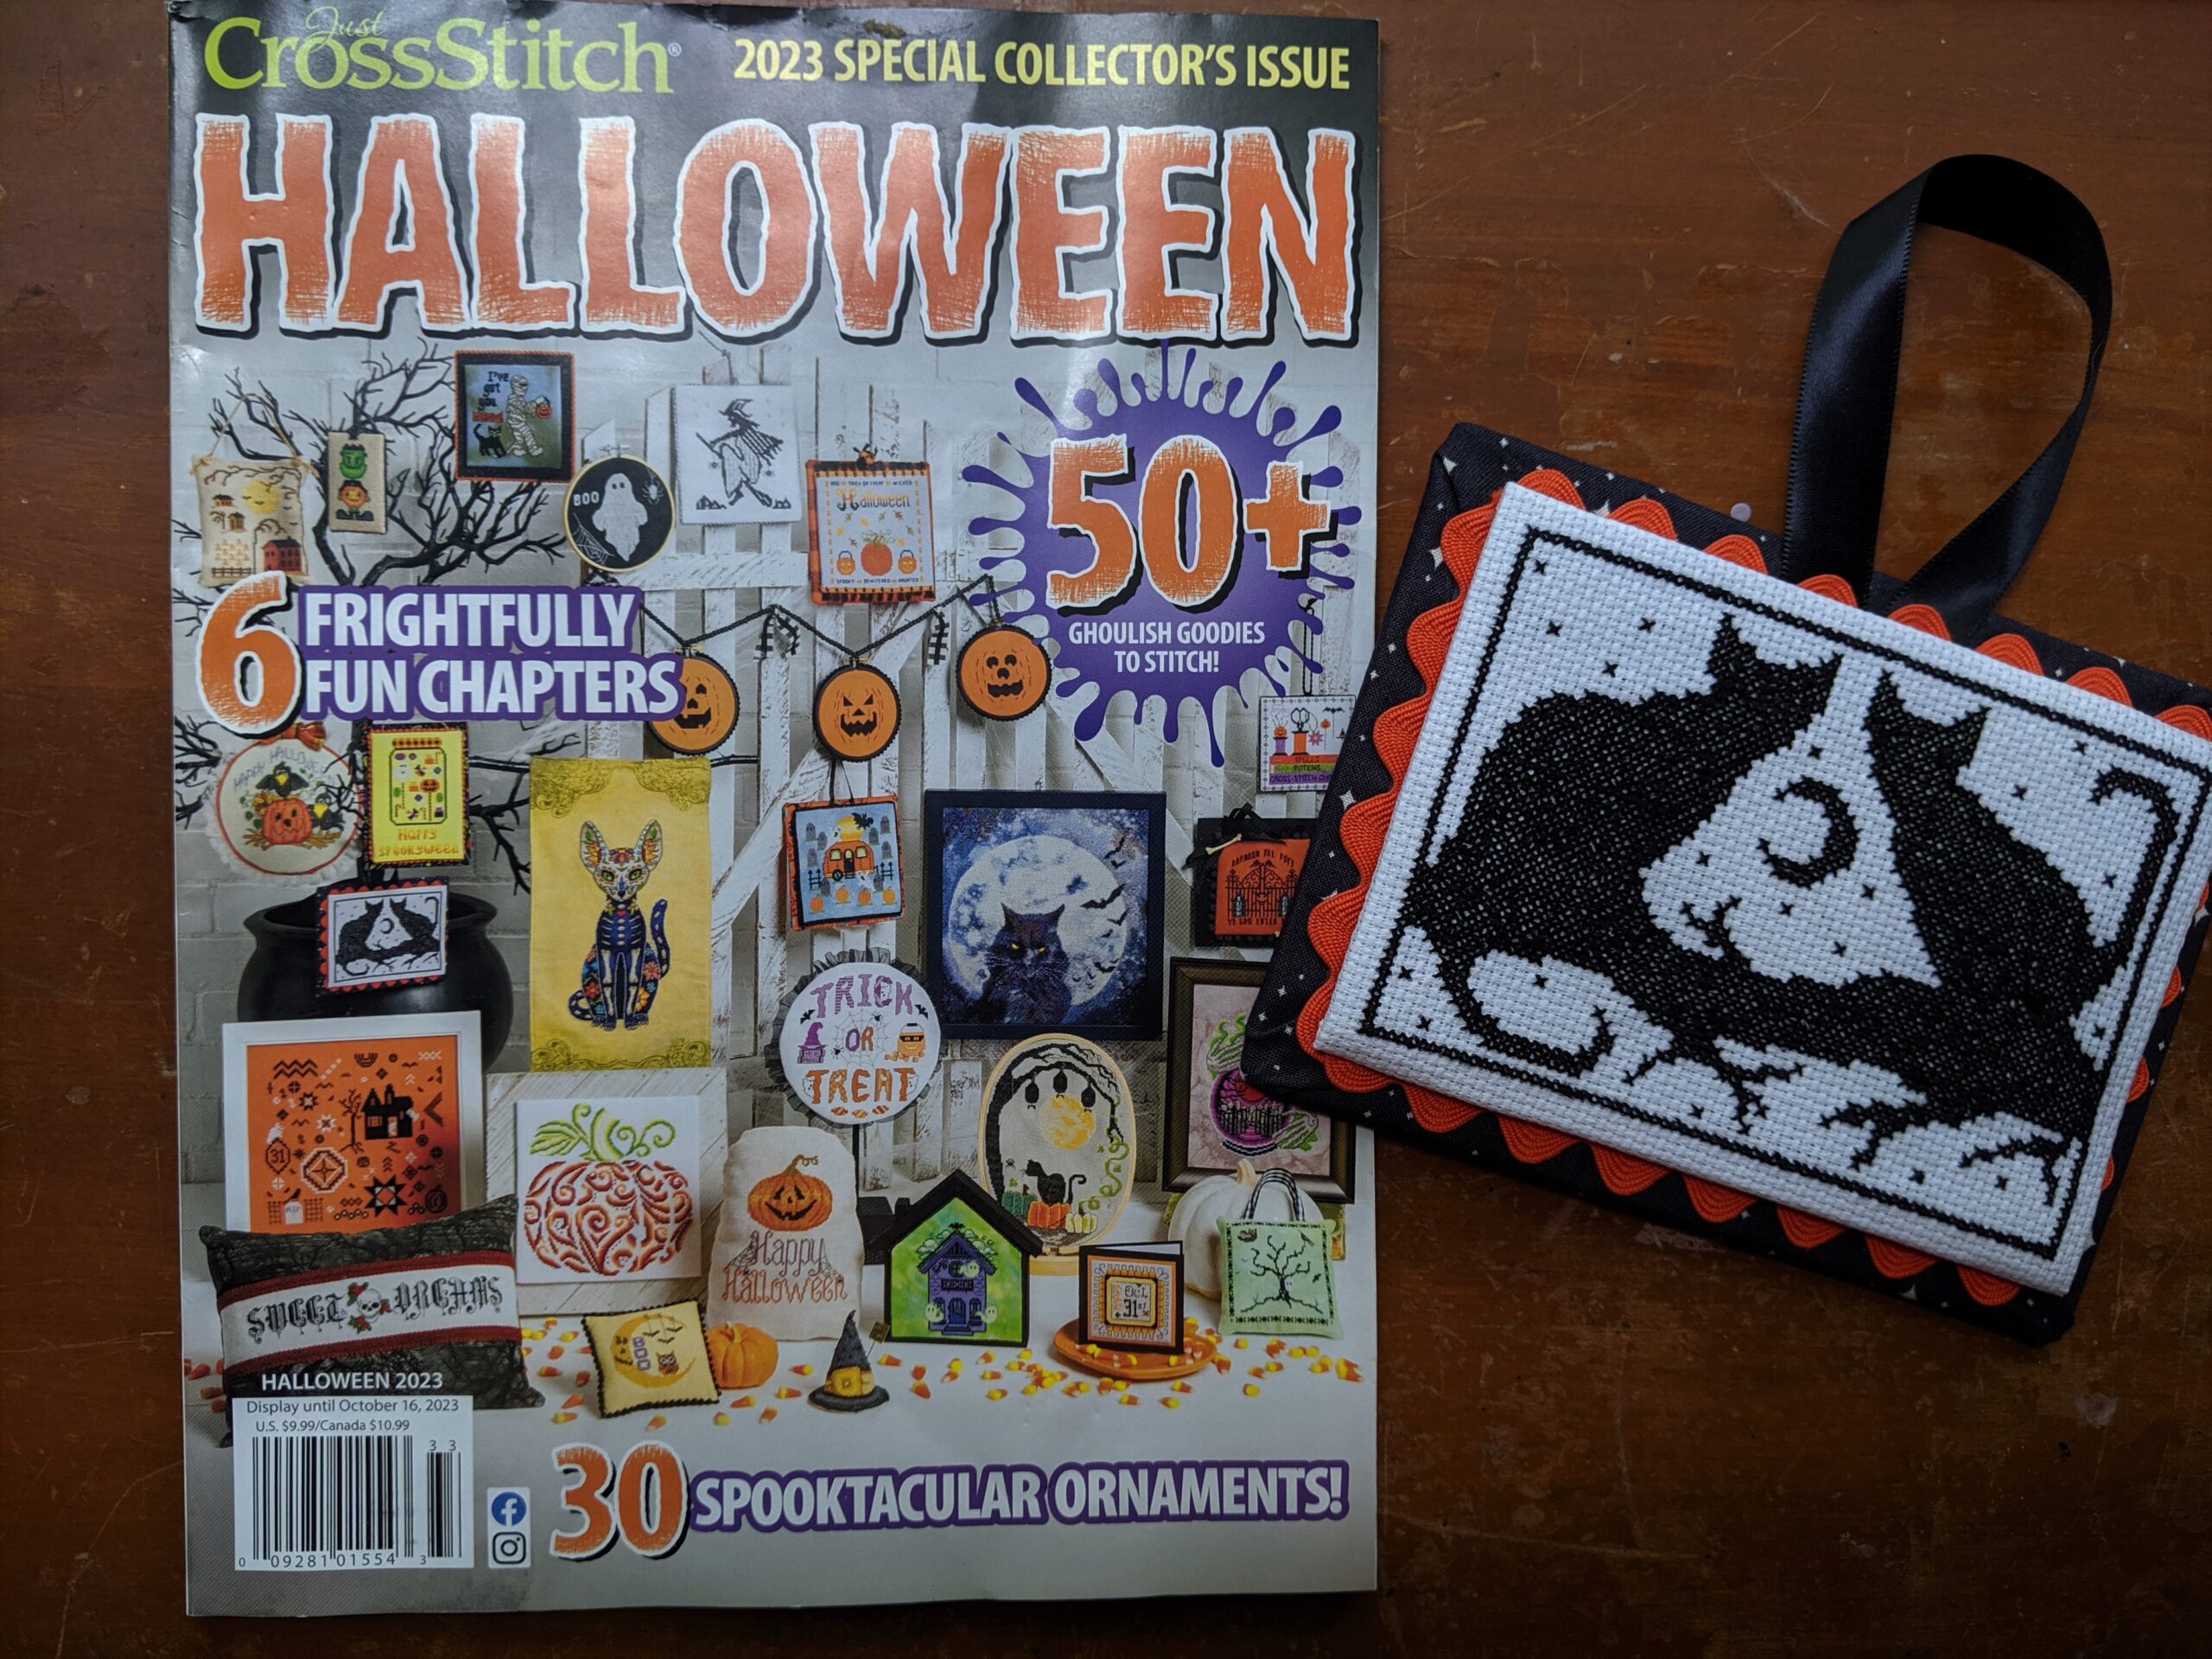 Just Cross Stitch Magazine Halloween with finished Wicca ornament